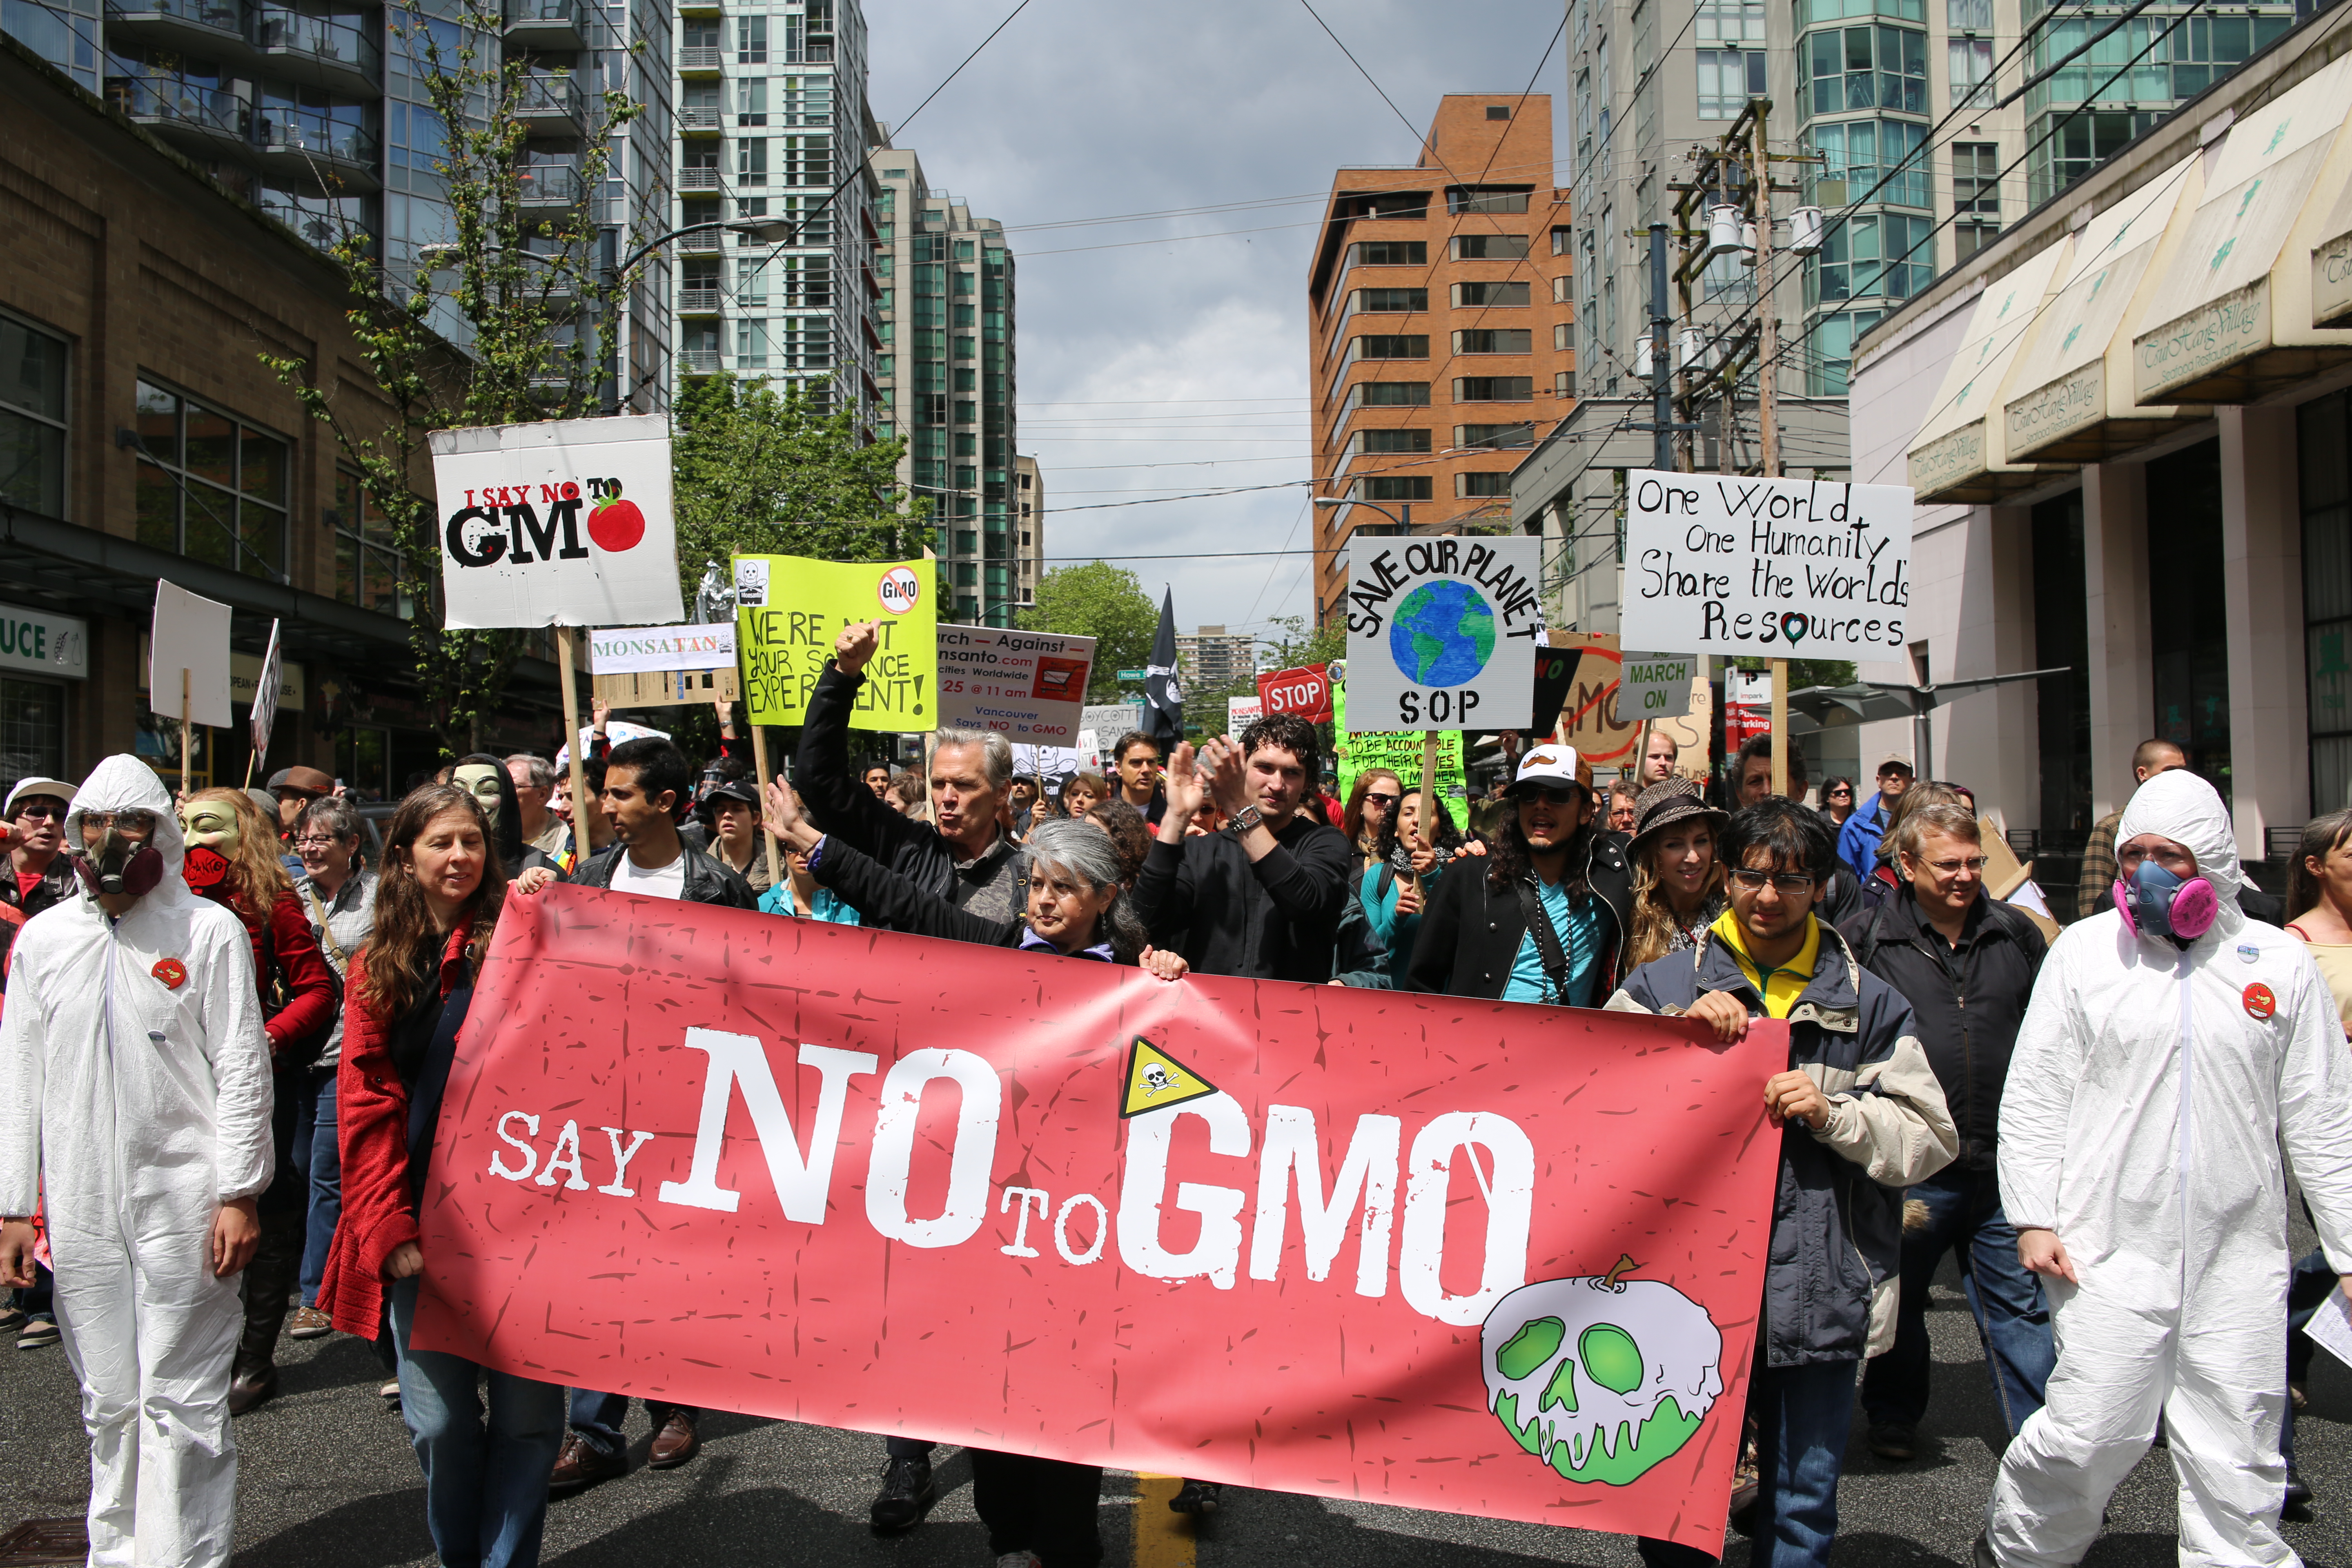 Individuals protesting the use of GMOs or Genetically Modified Organisms